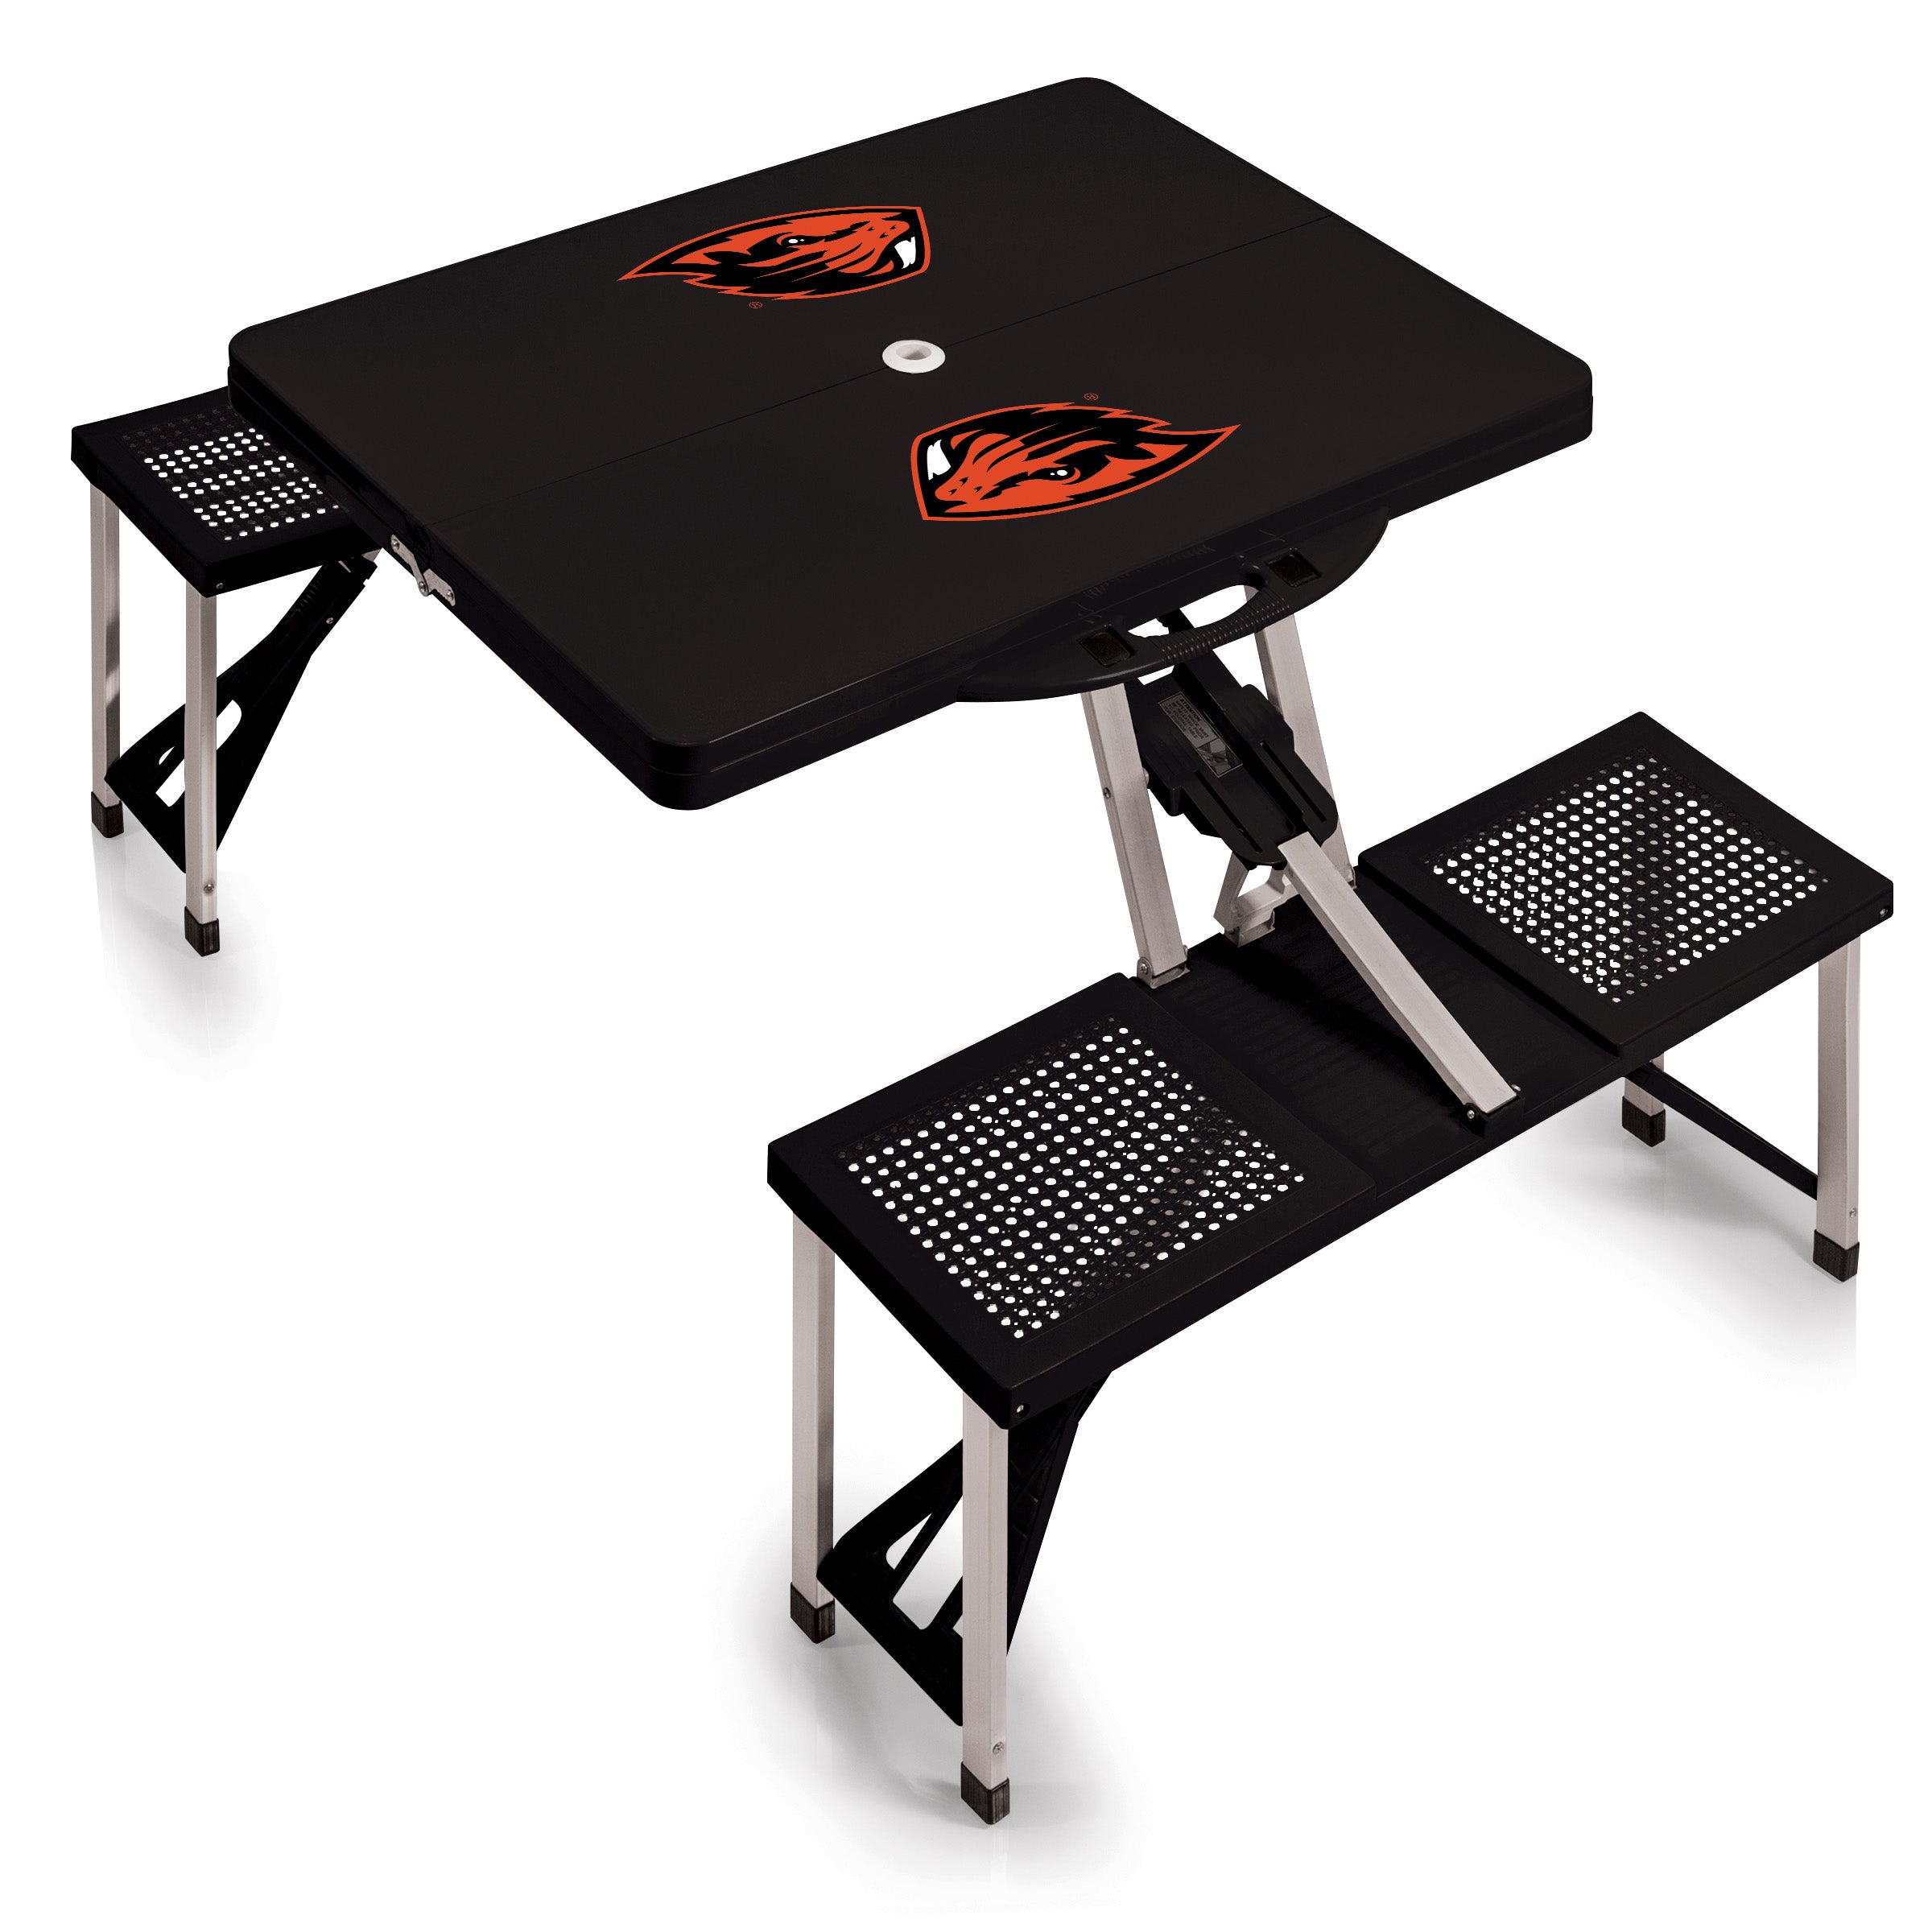 Oregon State Beavers - Picnic Table Portable Folding Table with Seats